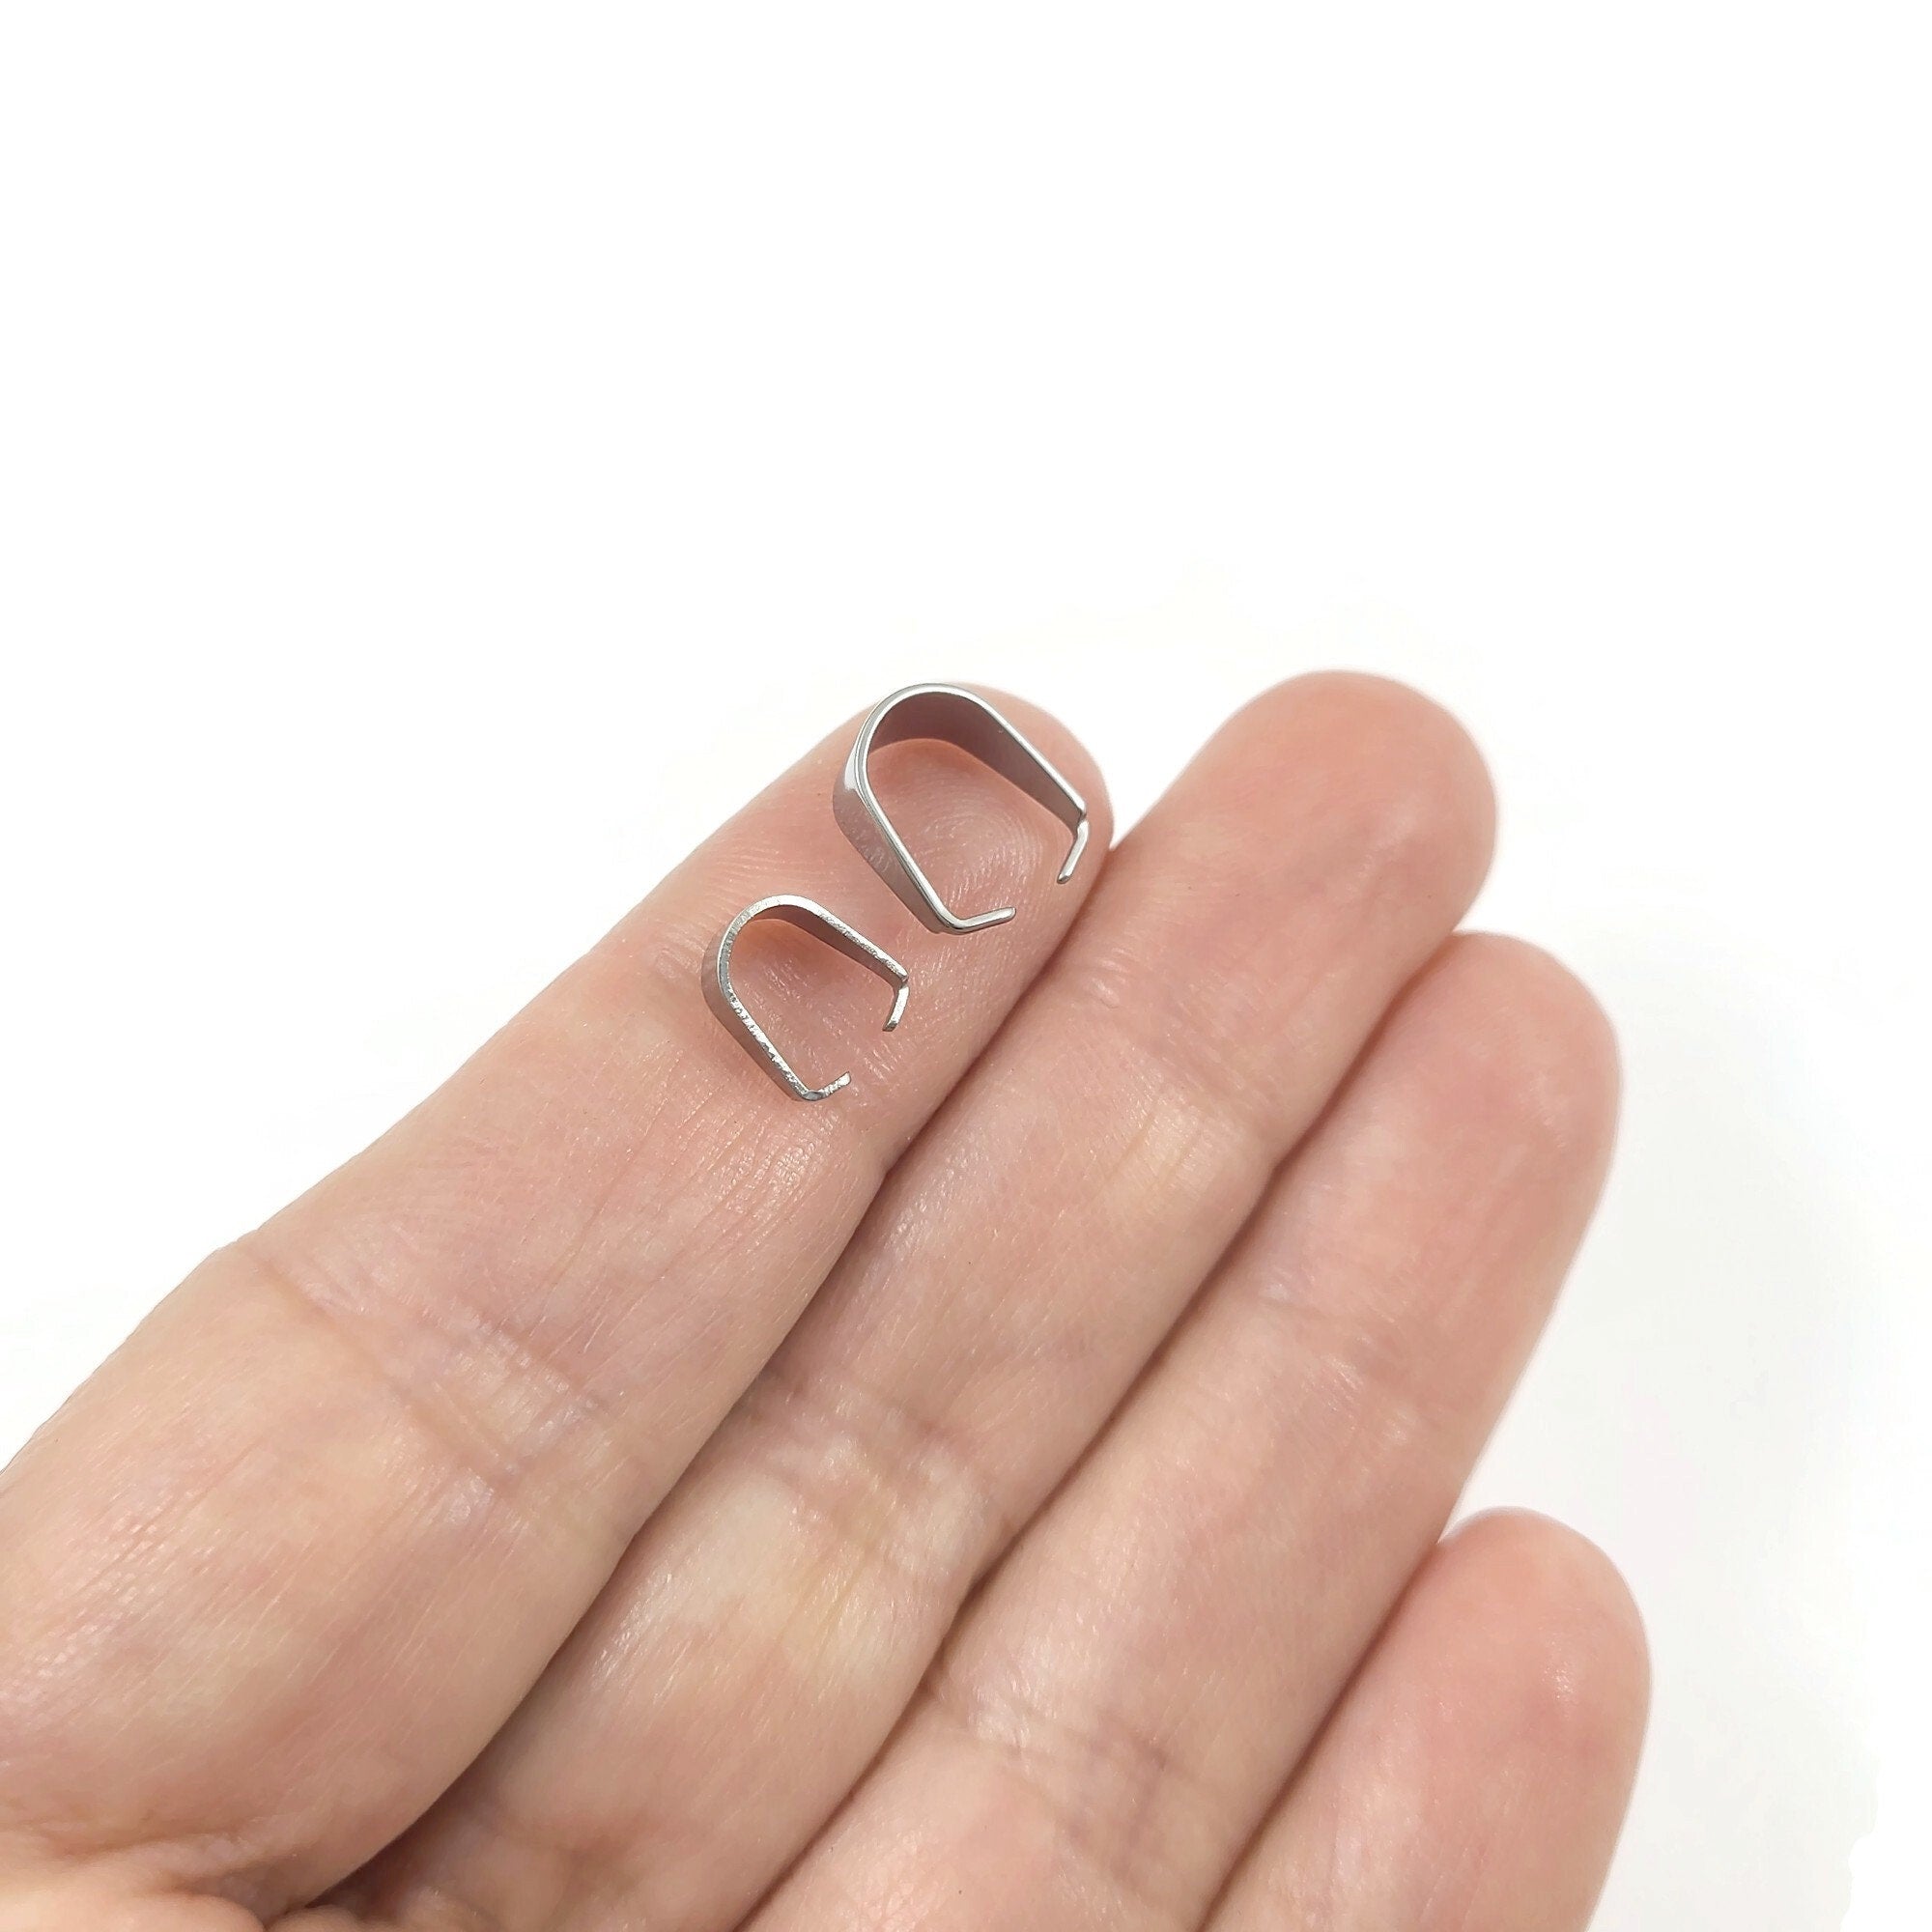 10pcs Stainless Steel Pendant Clasp Pinch Clip Bail Hook Connector